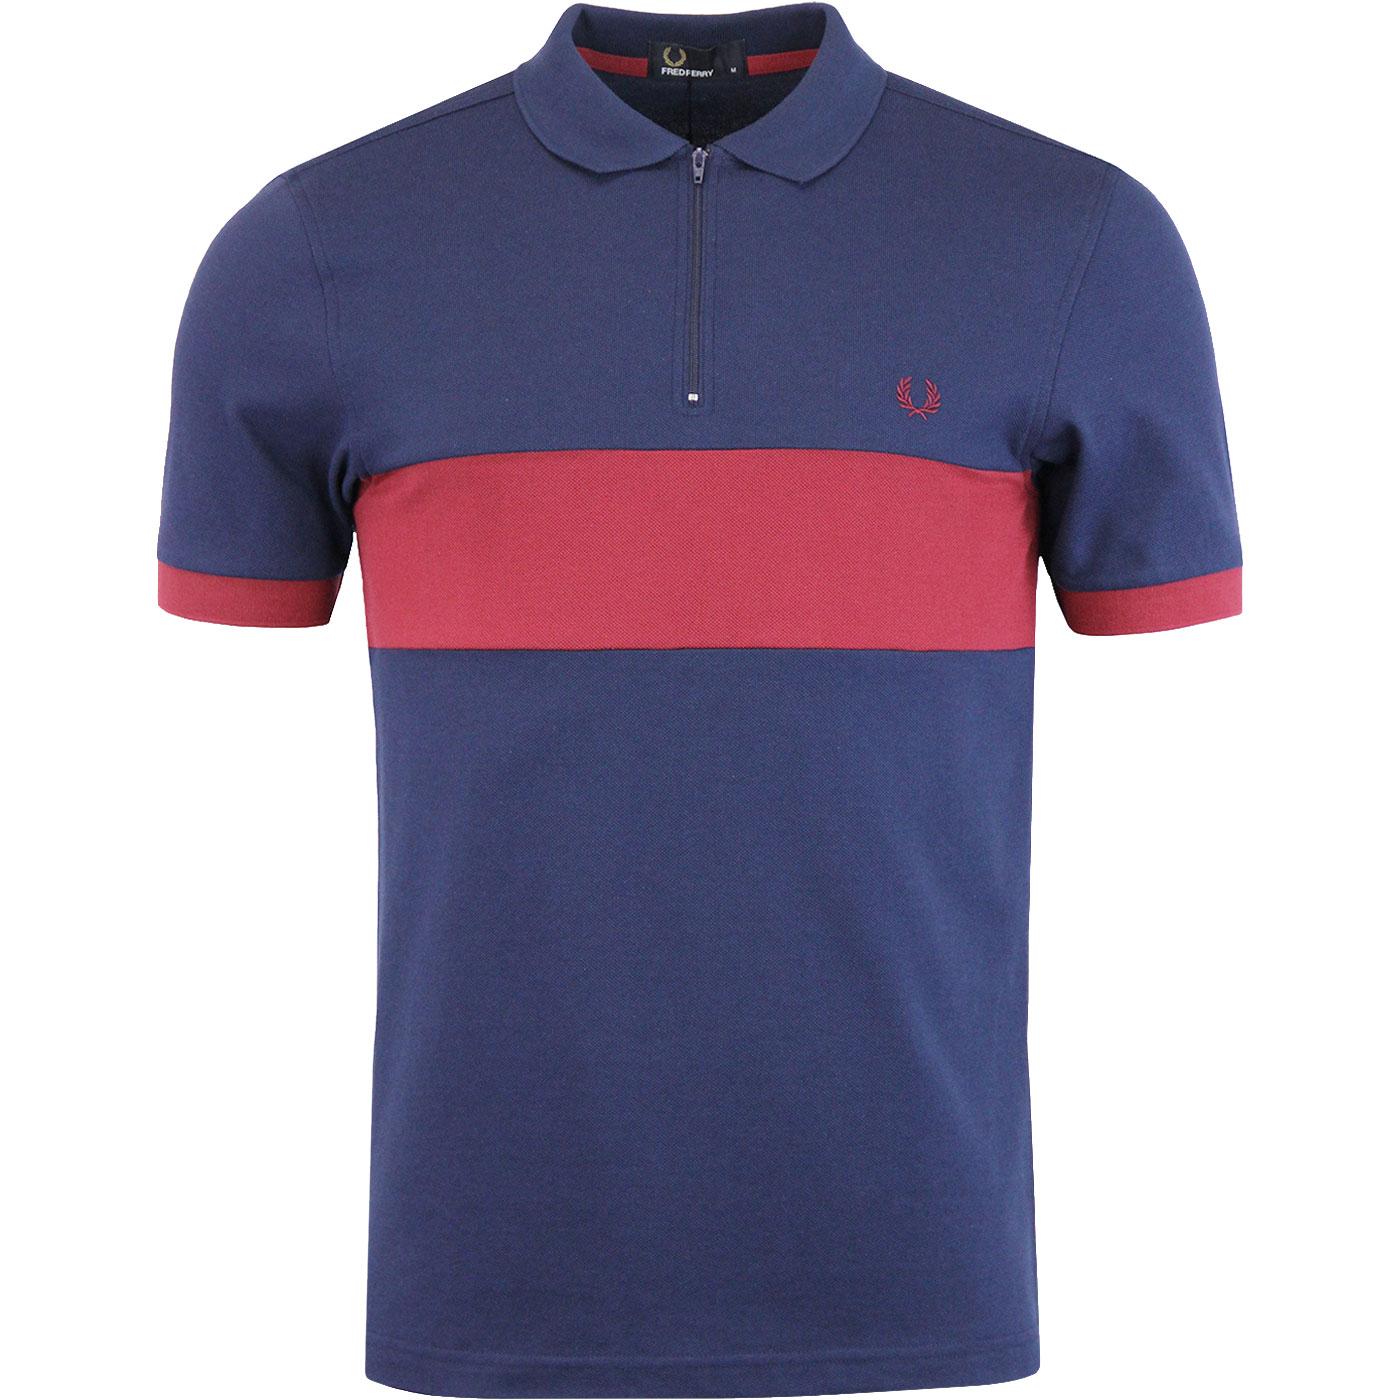 FRED PERRY Chest Panel Zip Placket Pique Polo 